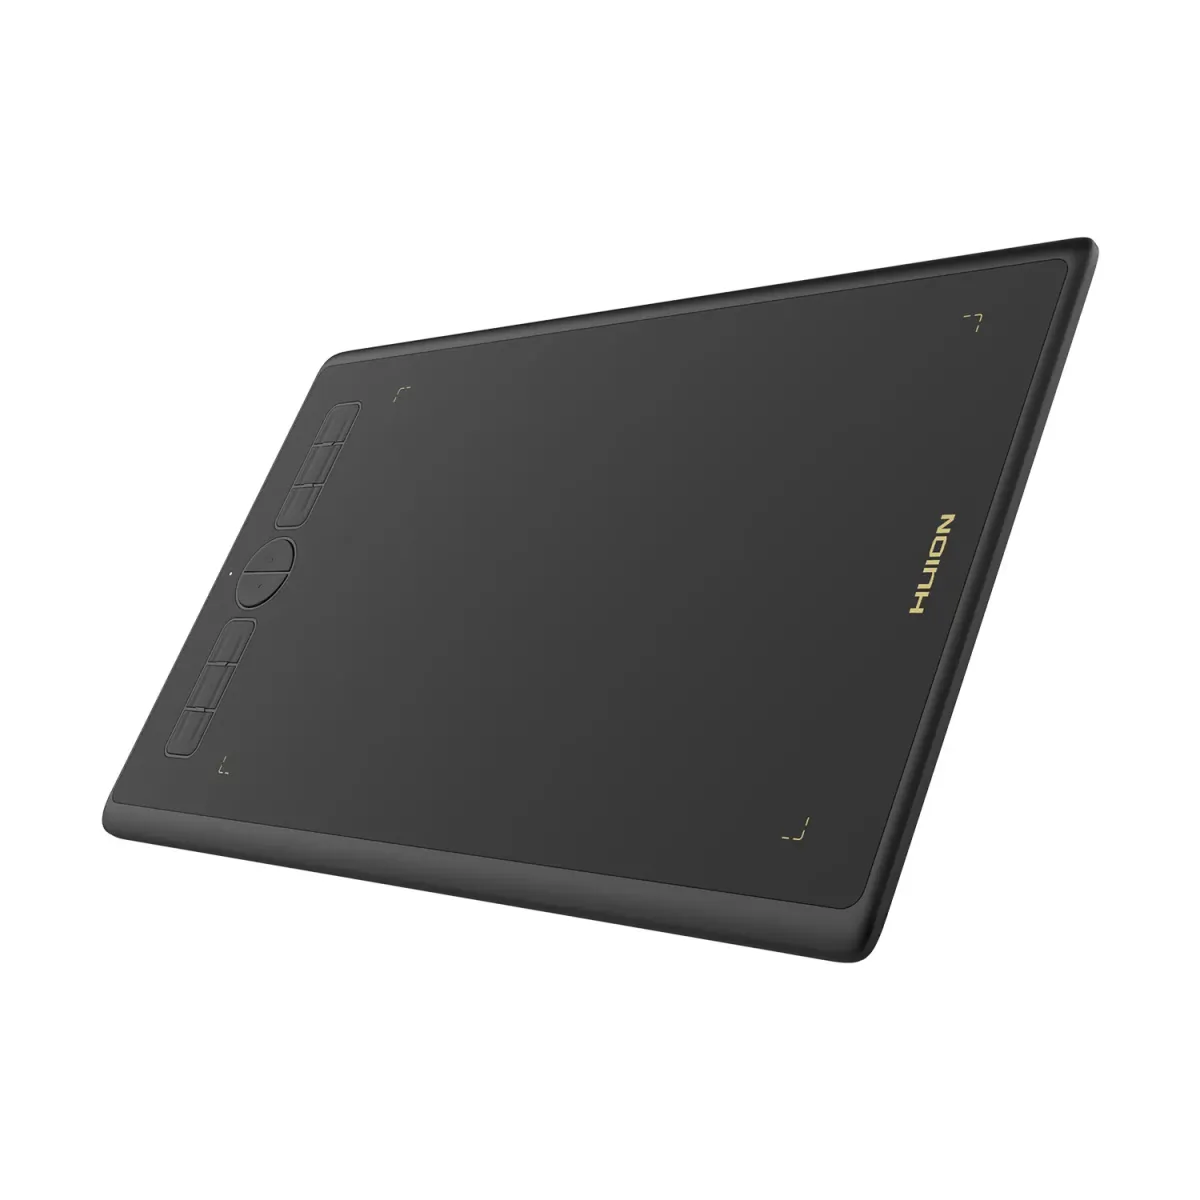 Unboxing Huion A4 Light Pad and Comparing it to the Huion L4S